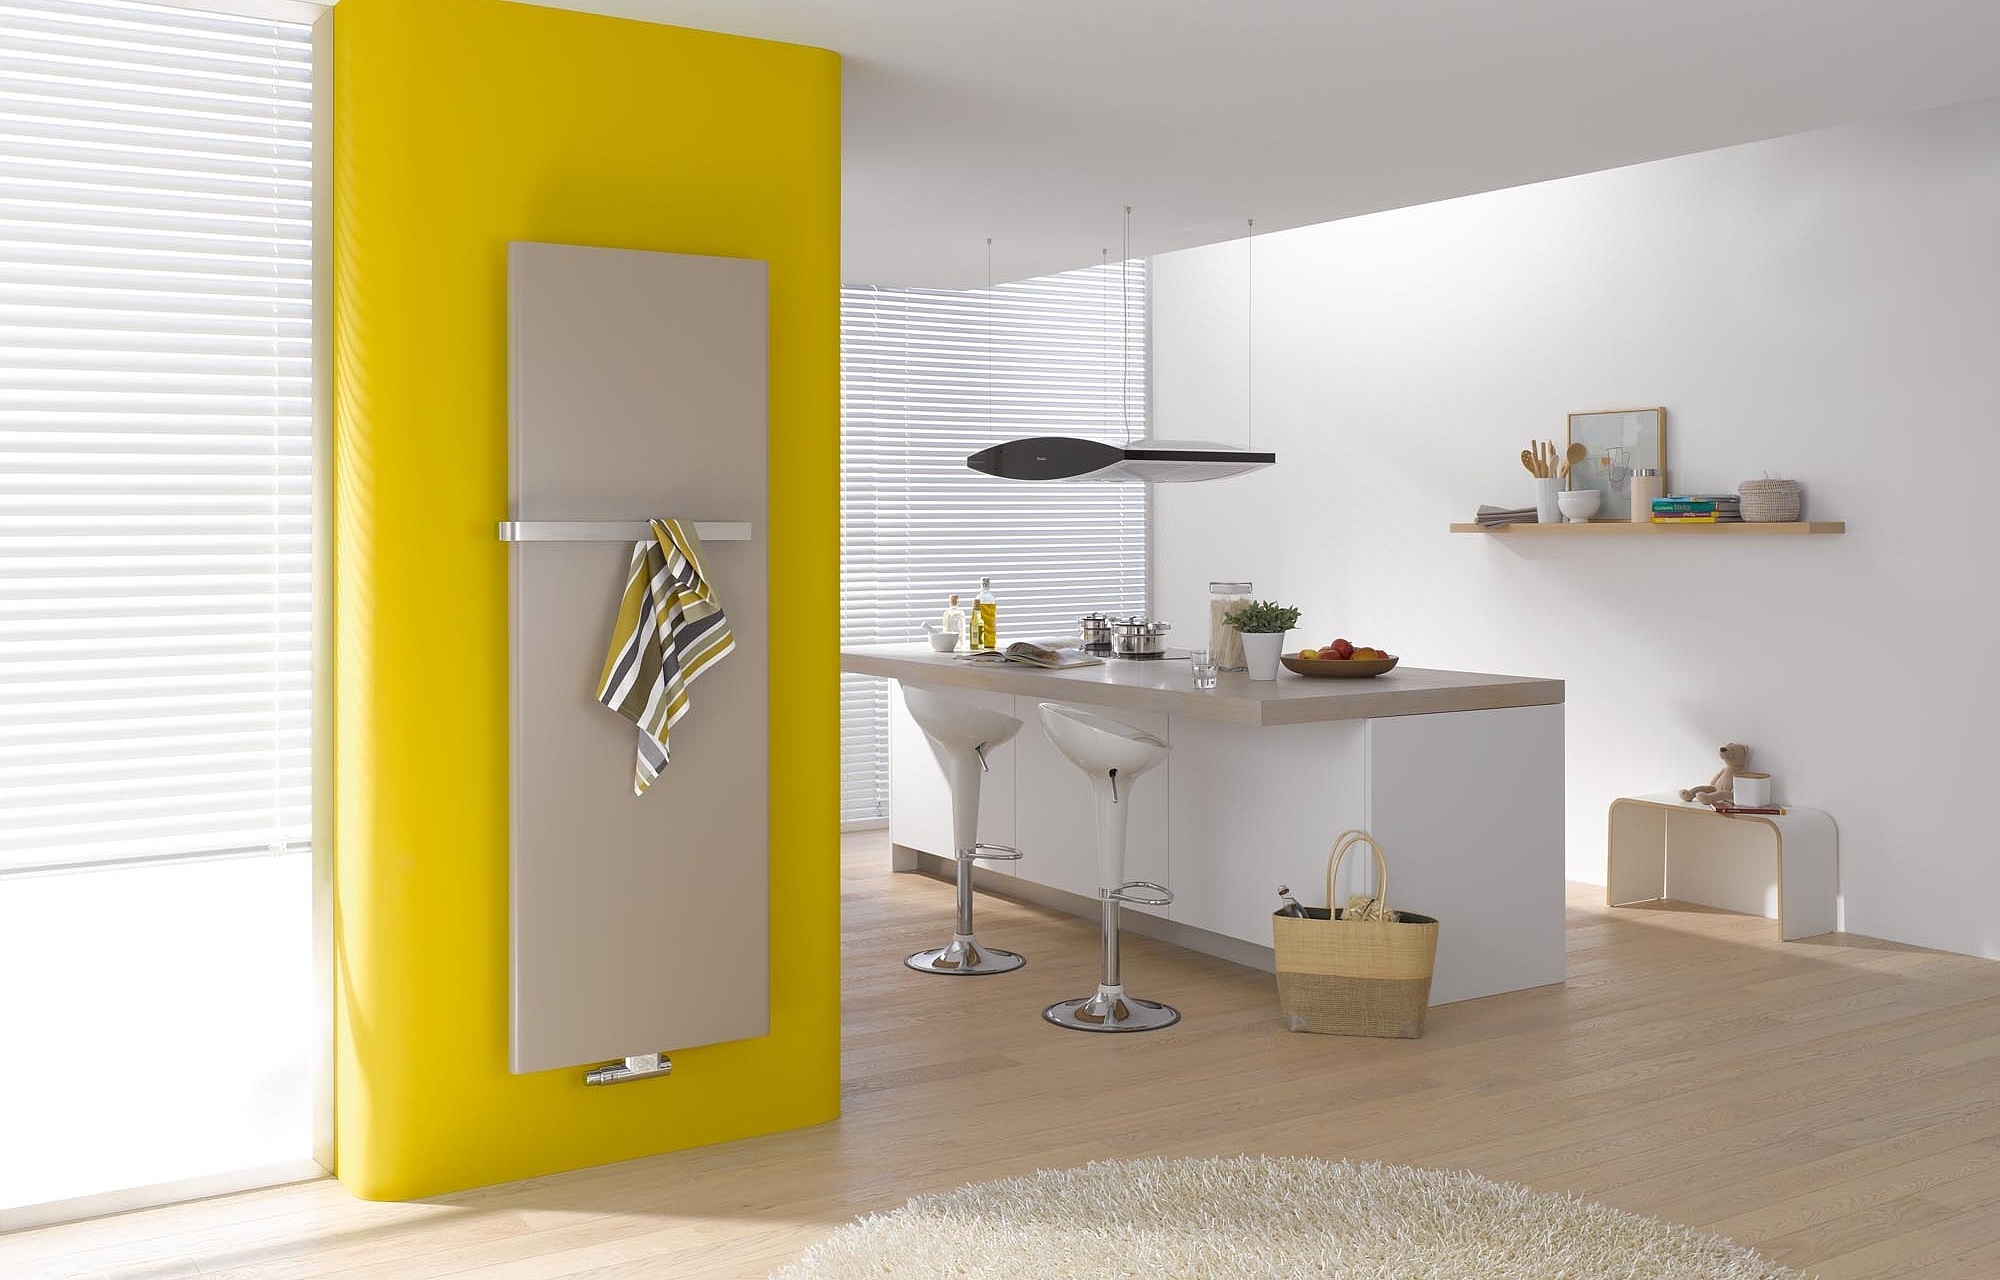 Kermi Pateo design and bathroom radiators with towel rail option for added convenience.